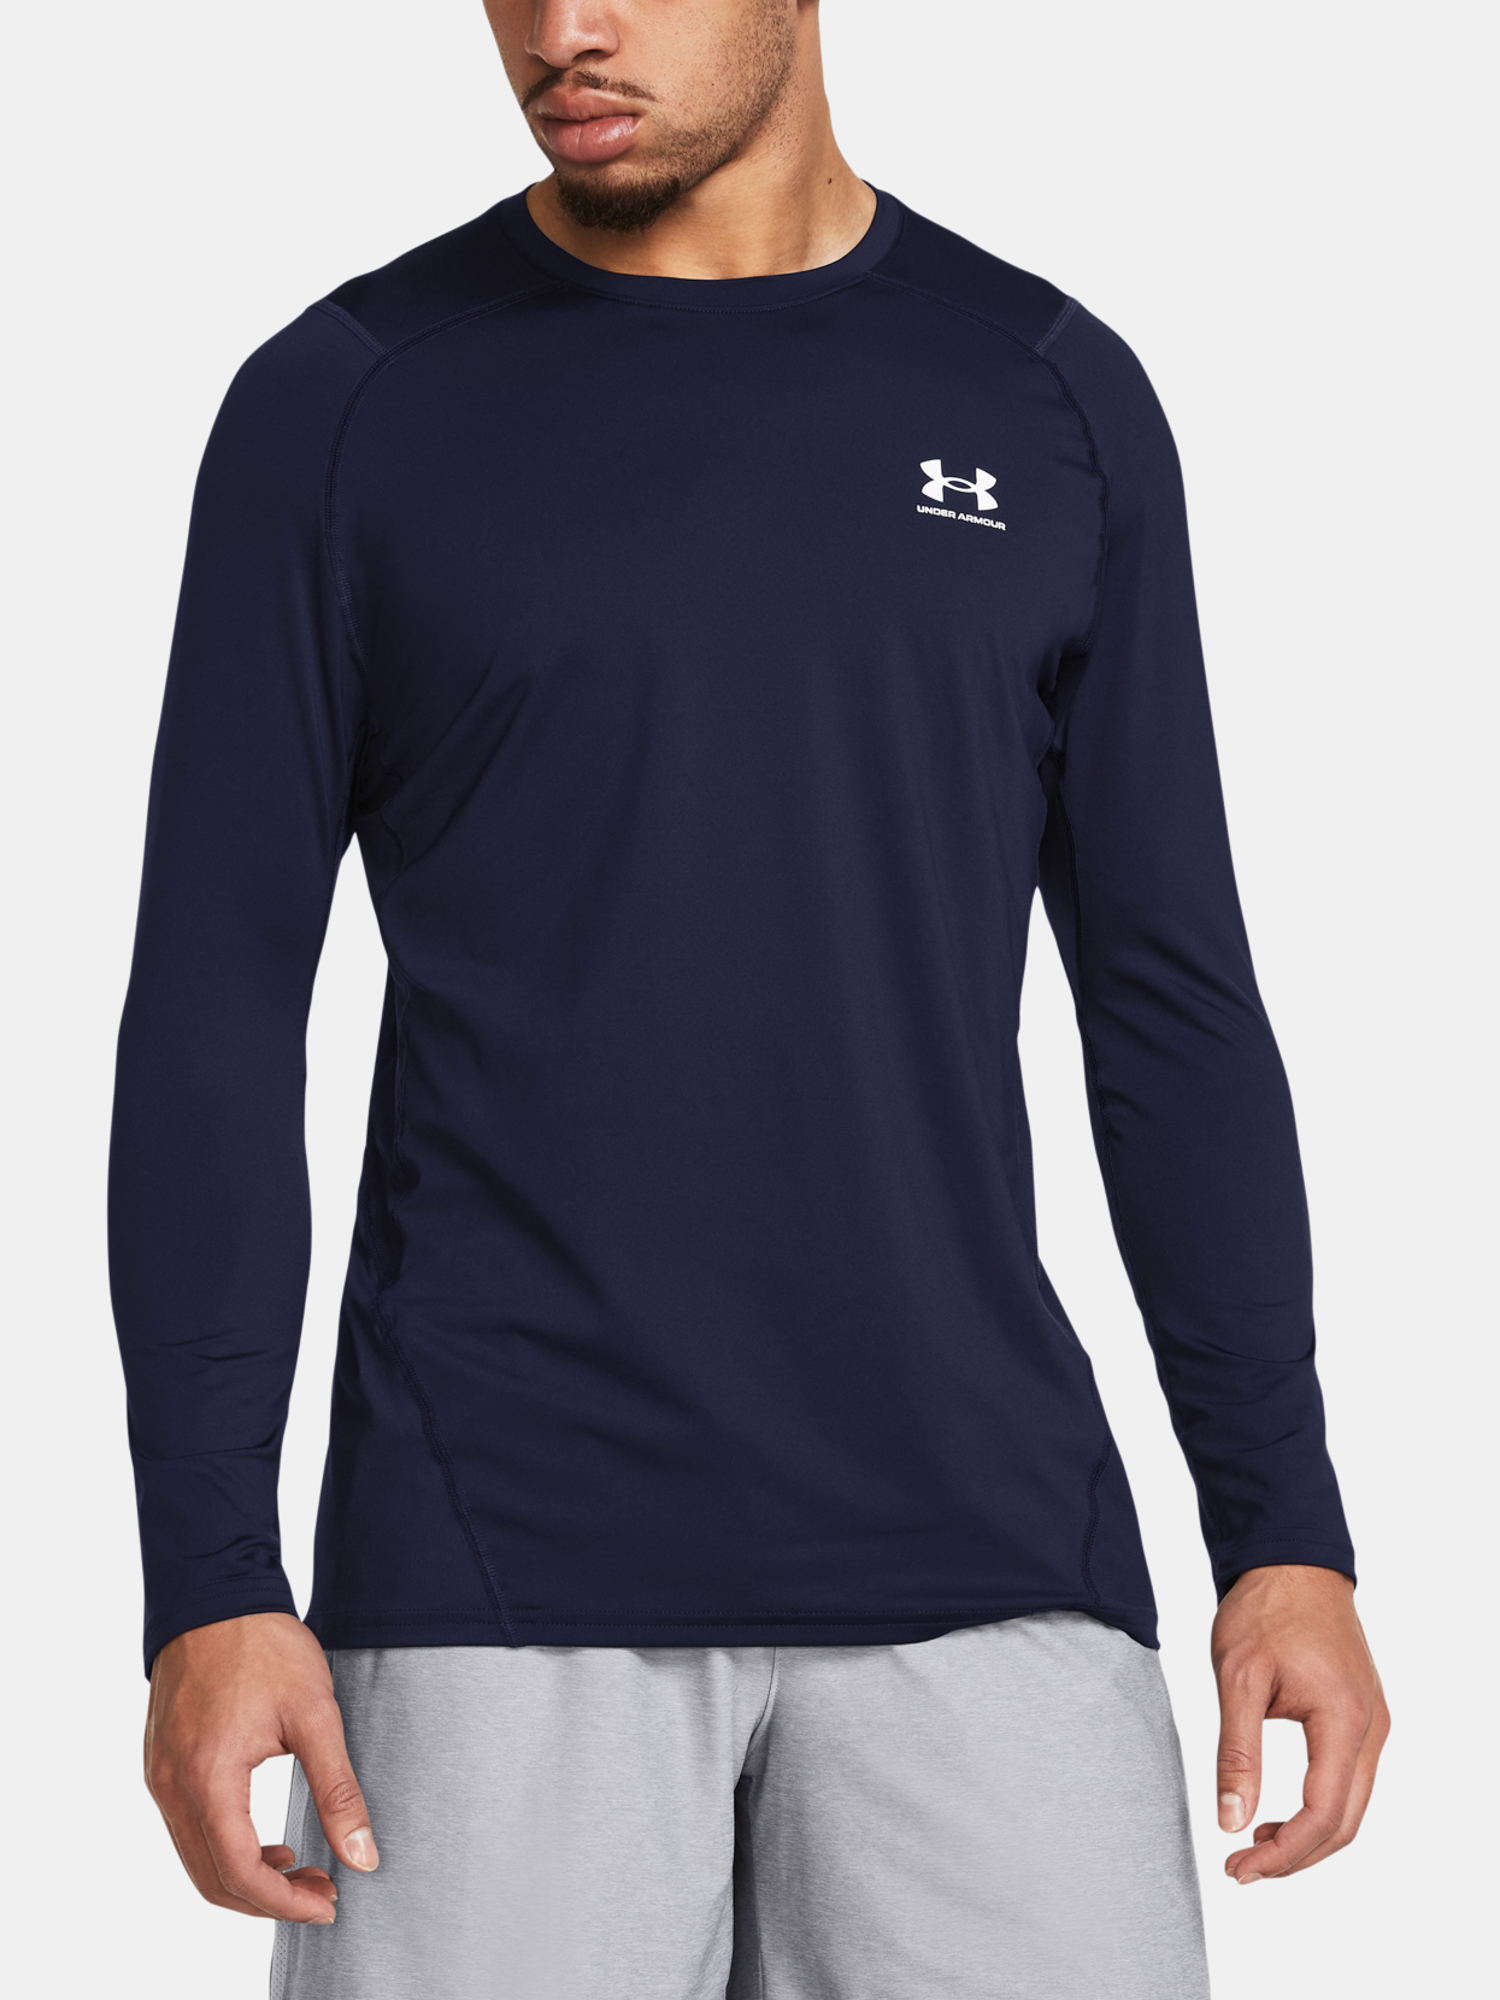 Under Armour T-Shirt UA HG Armour Fitted LS-BLU - Men's